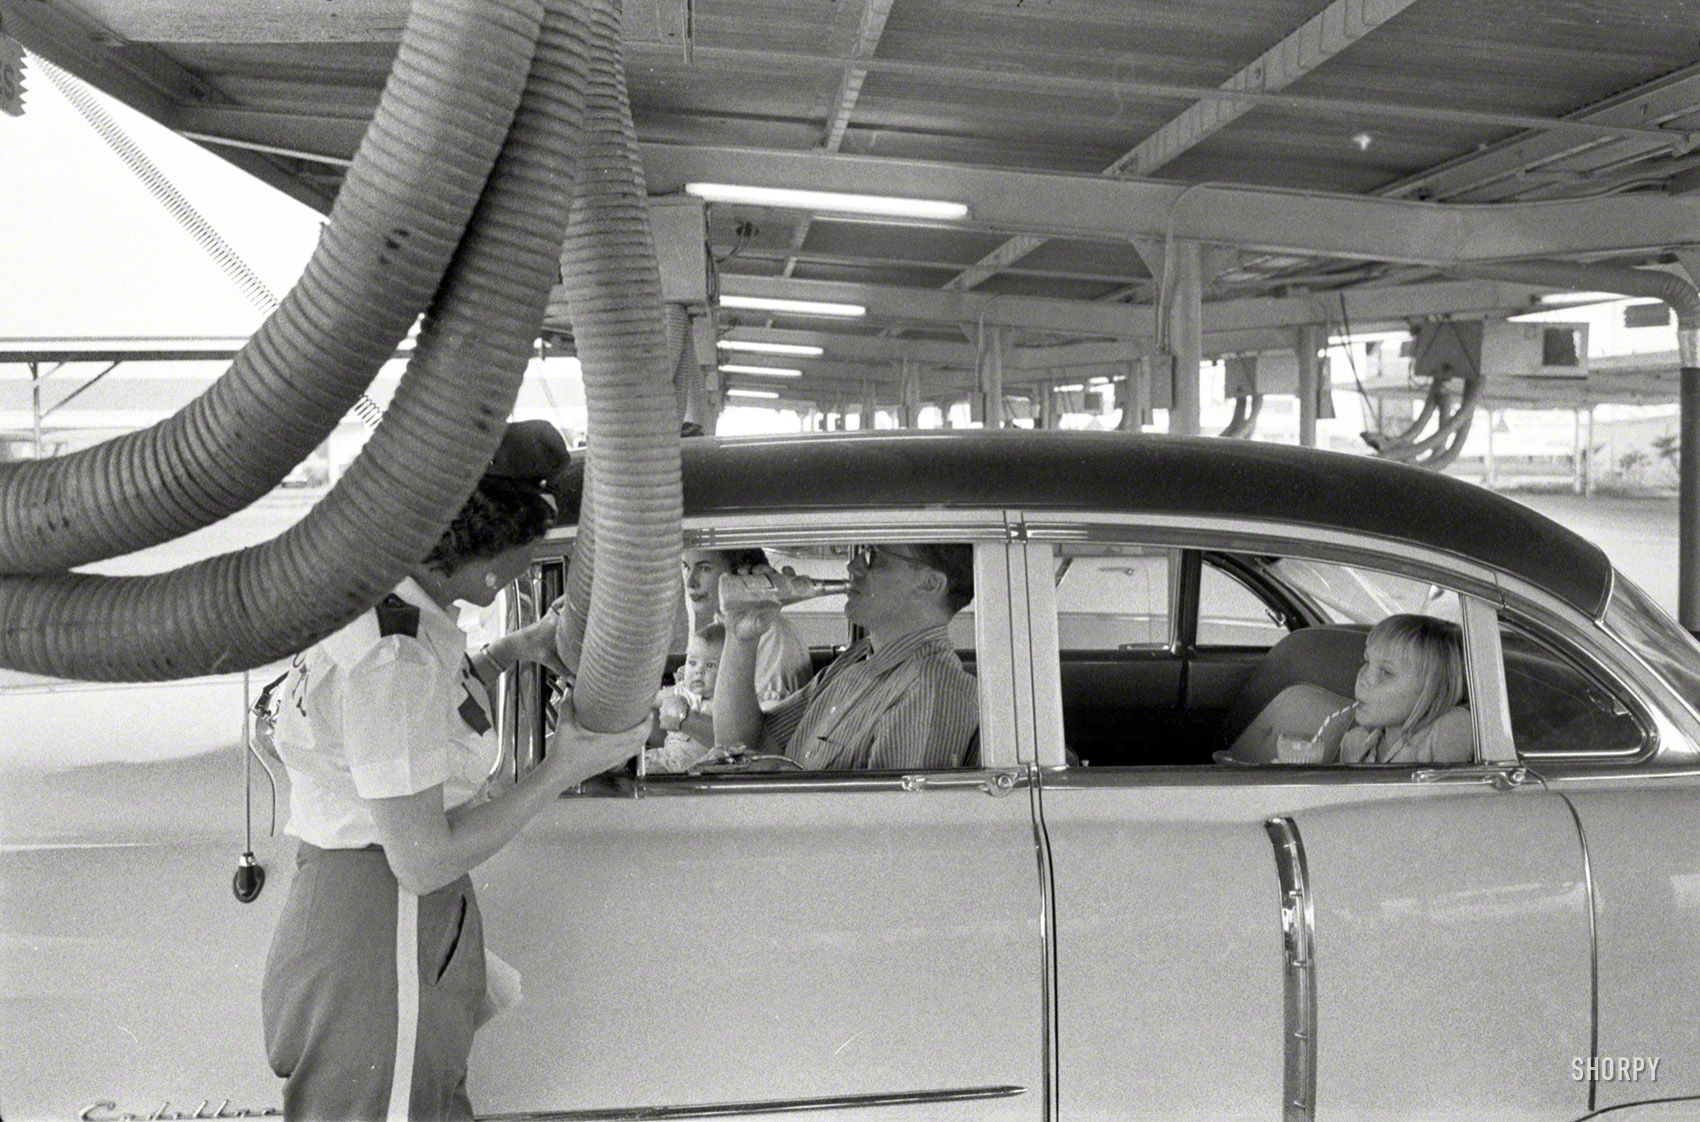 1957. "Robert and Norma Norton of Houston, Texas, with their family, illustrating life before and after having the house air-conditioned. Includes photos of the family at a drive-in restaurant having cool air piped into their car" -- a Cadillac sedan that already has air conditioning. Photo by Jim Hansen for the Look magazine article "How the Nortons Beat the Heat." View full size.